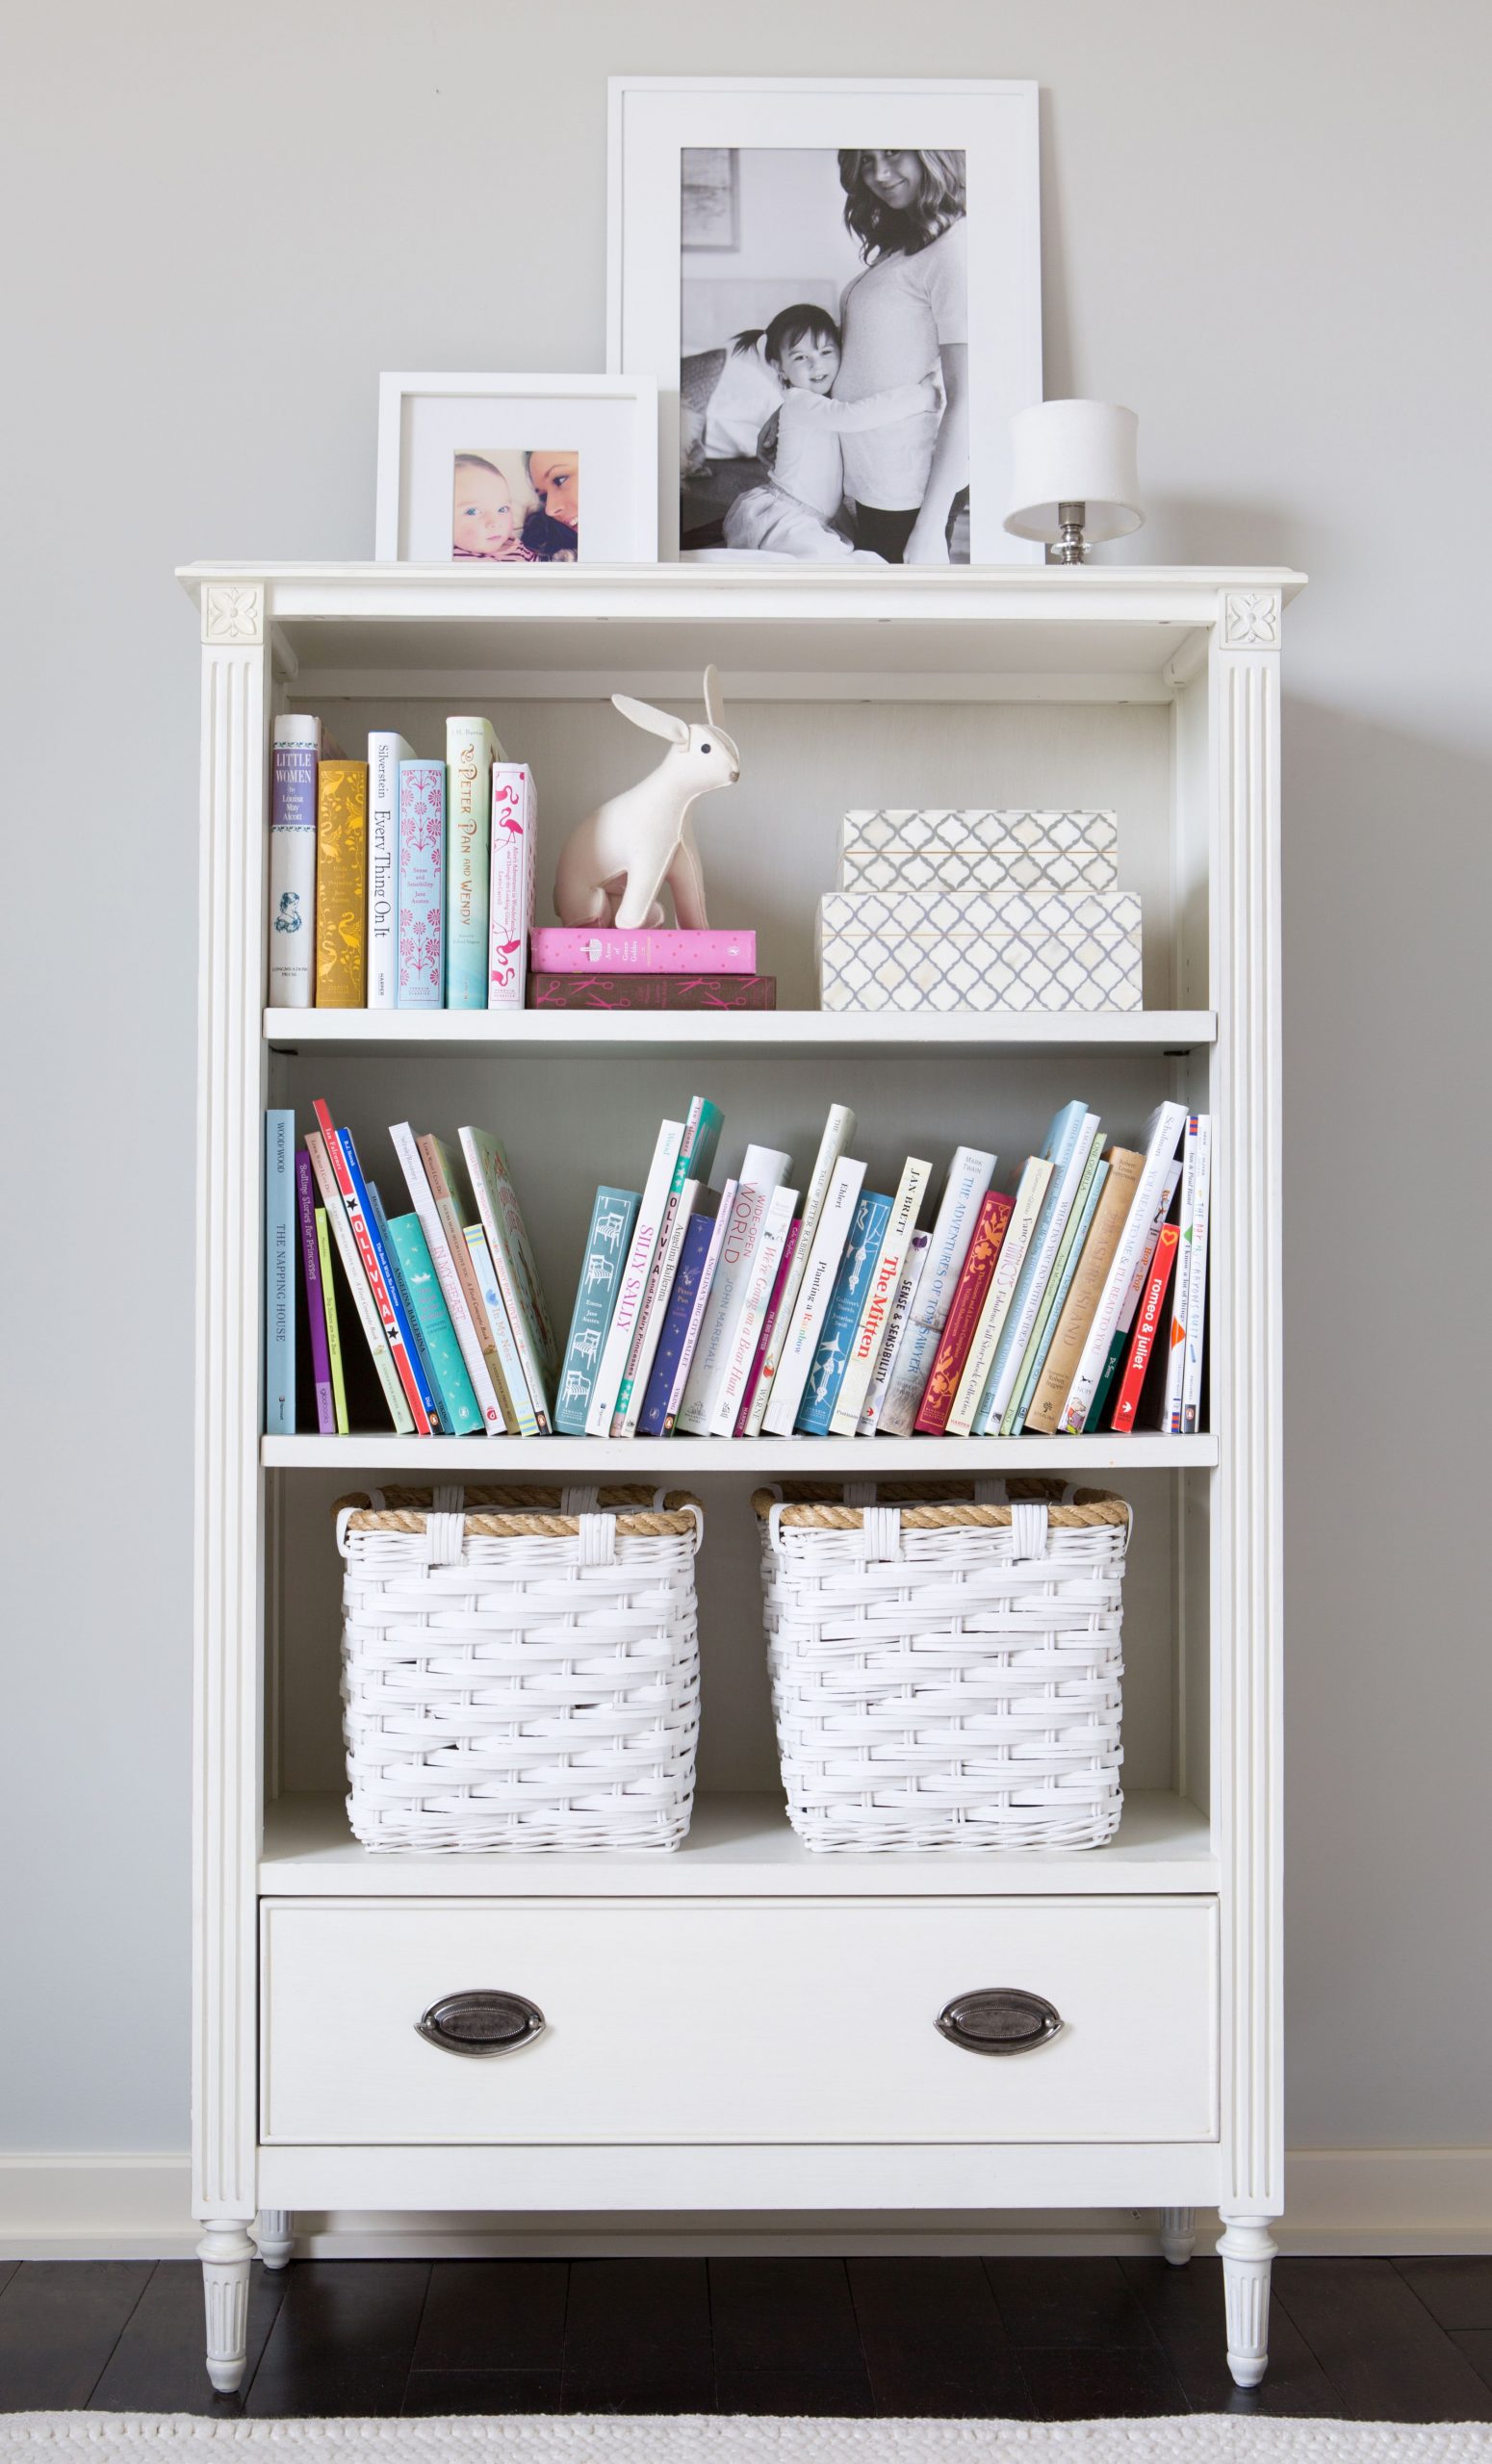 Simple Pretty Bookshelf Styling In A Girls Room Kids Room pertaining to sizing 3366 X 5558